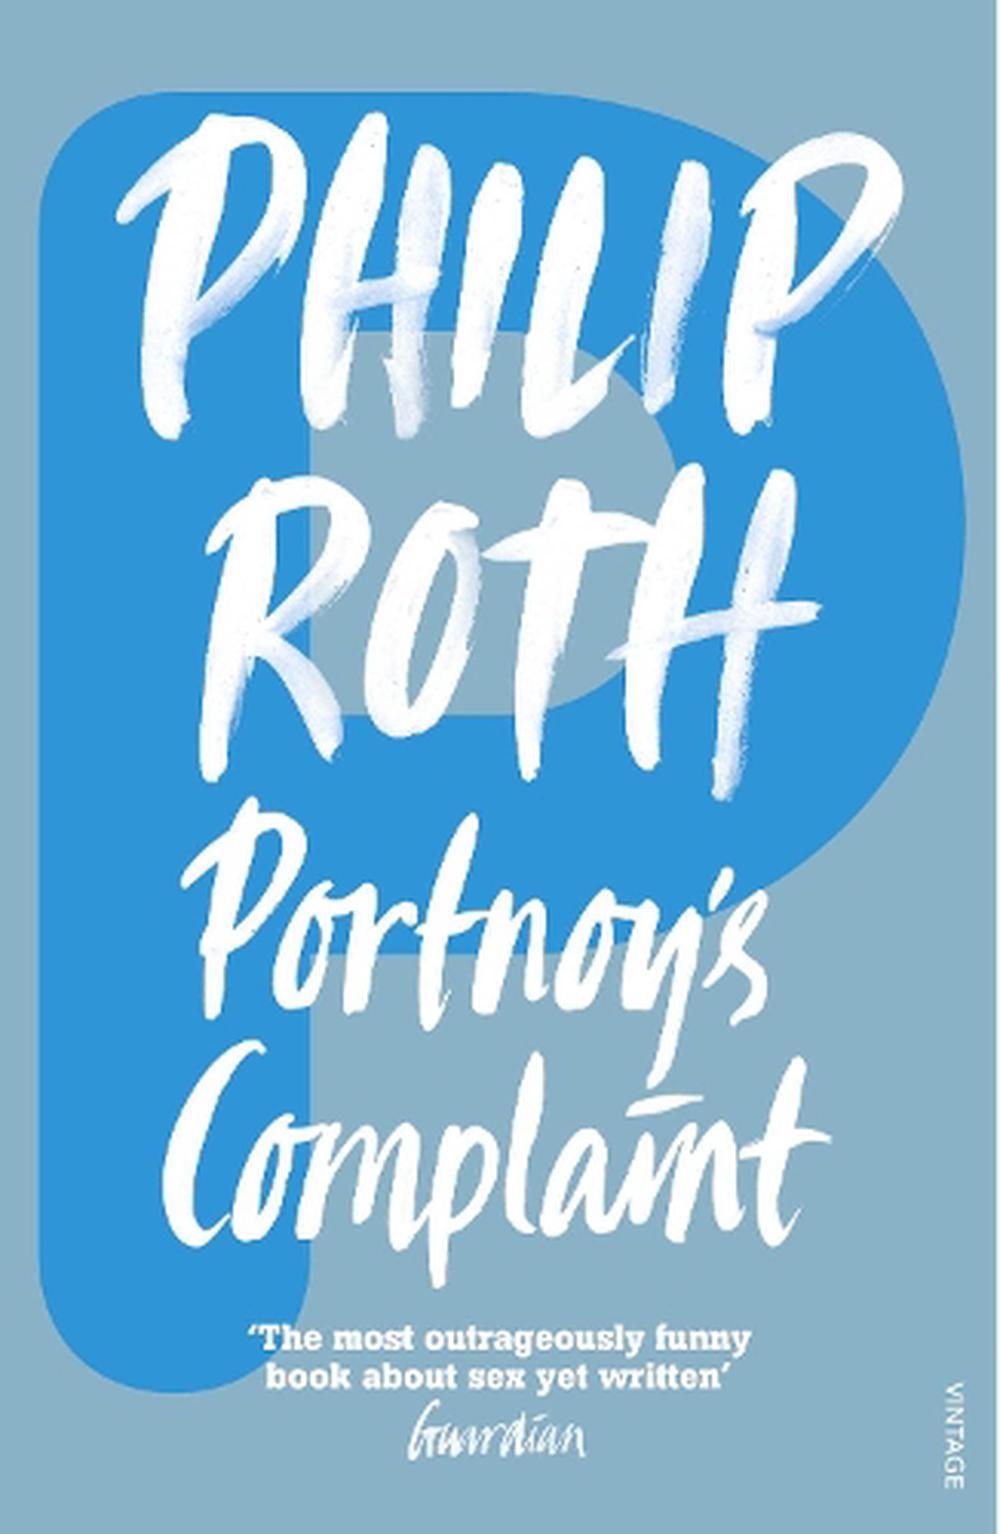 Portnoy’s Complaint by Philip Roth